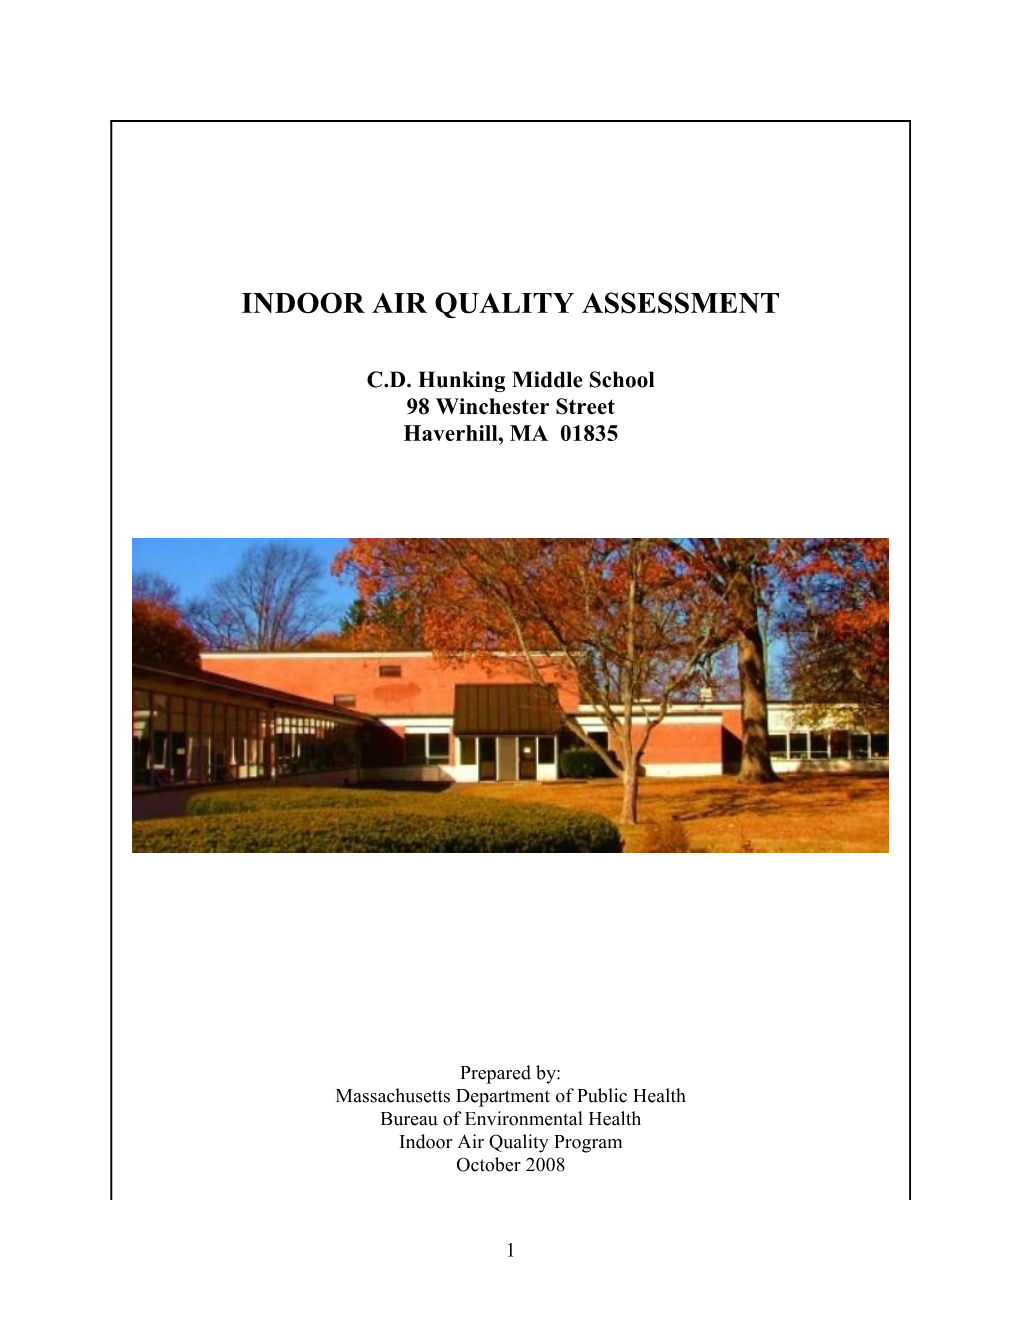 INDOOR AIR QUALITY ASSESSMENT - C.D. Hunking Middle School, 98 Winchester Street, Haverhill